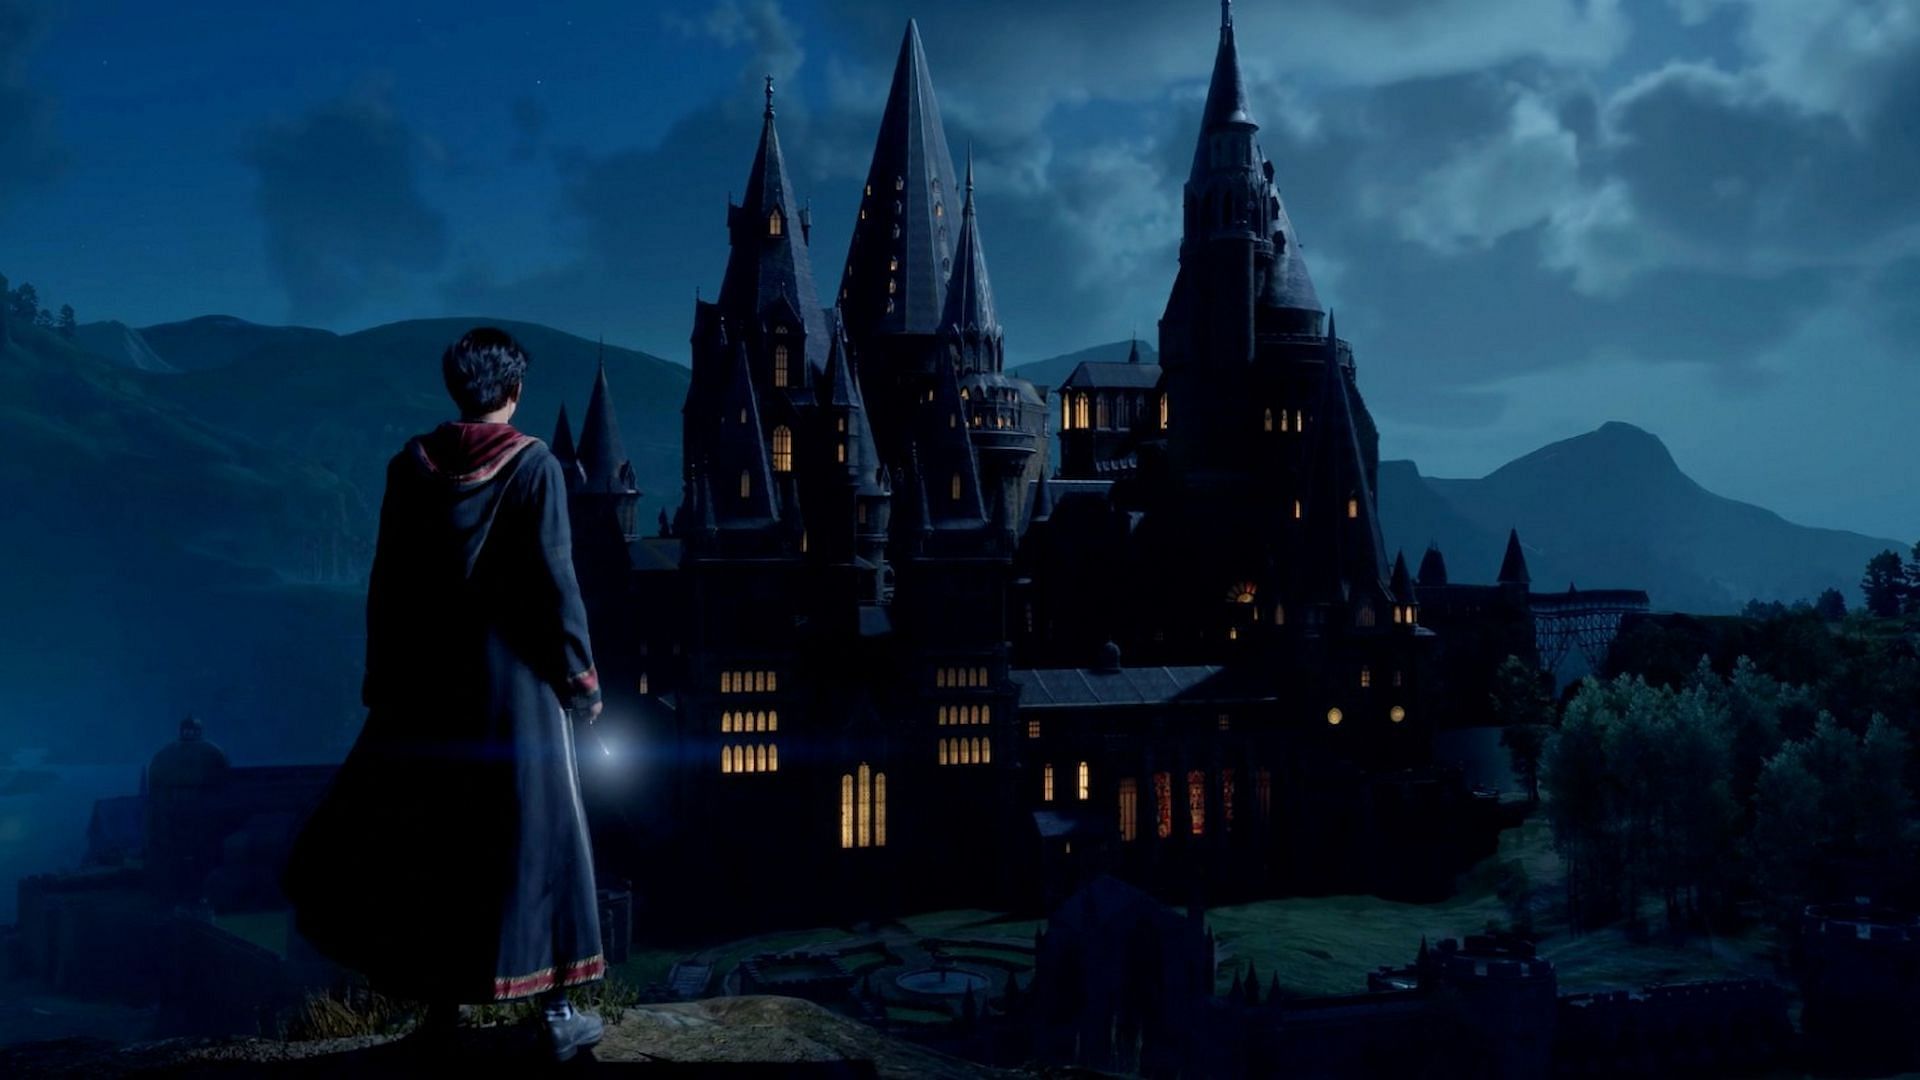 Hogwarts Legacy Xbox Preload Now Live, And You Can Install Before